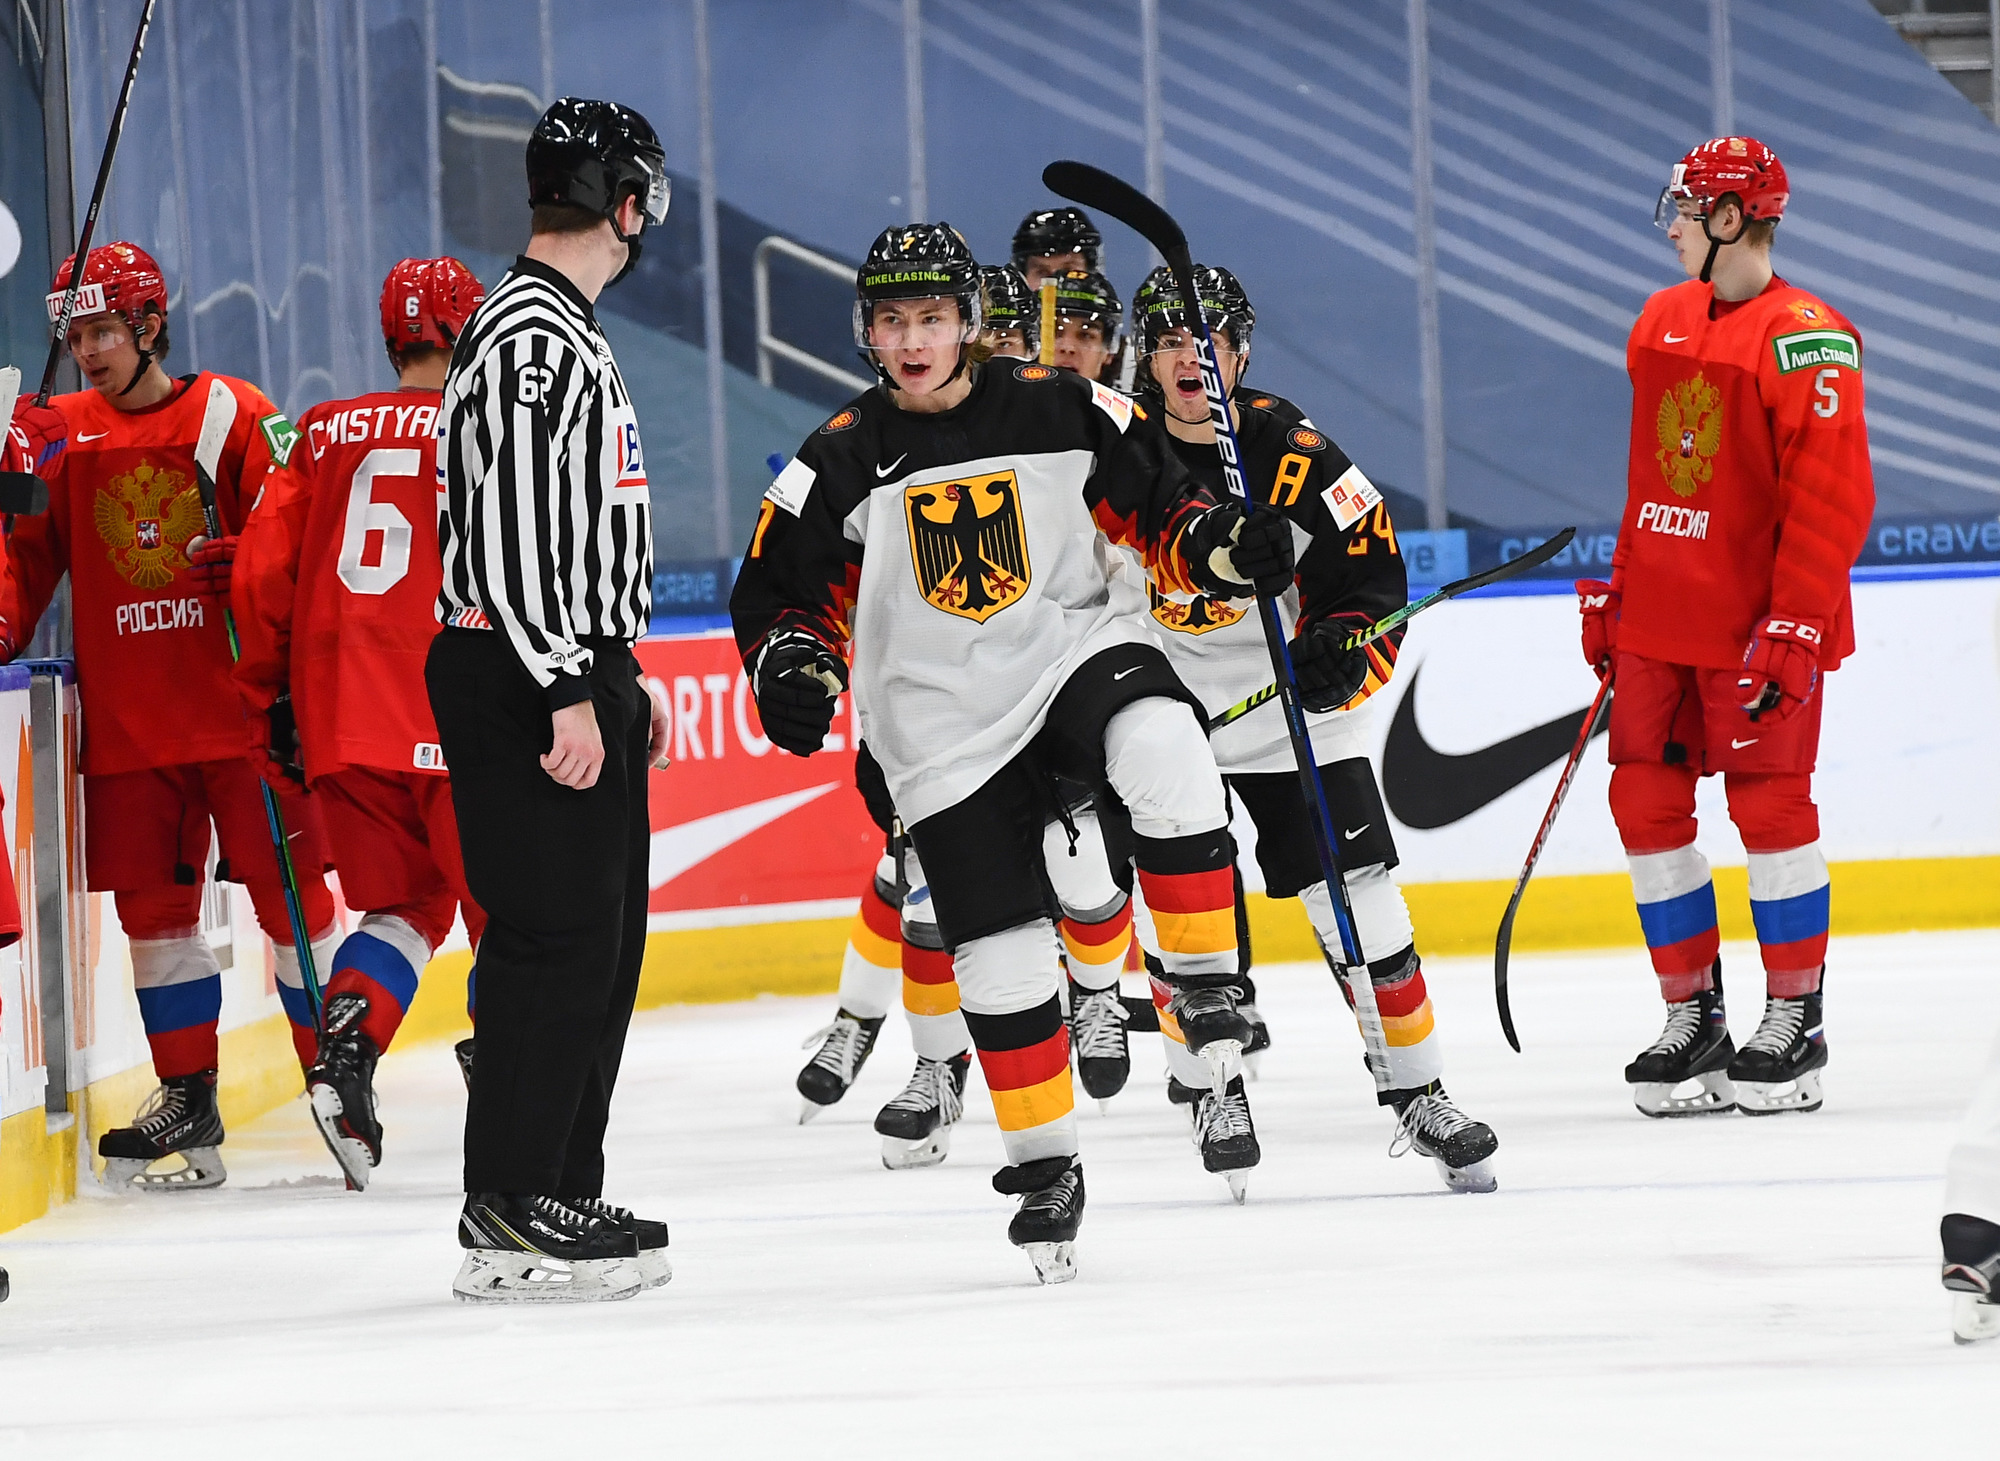 Lundell scores as Finland beats shorthanded Germany at world juniors